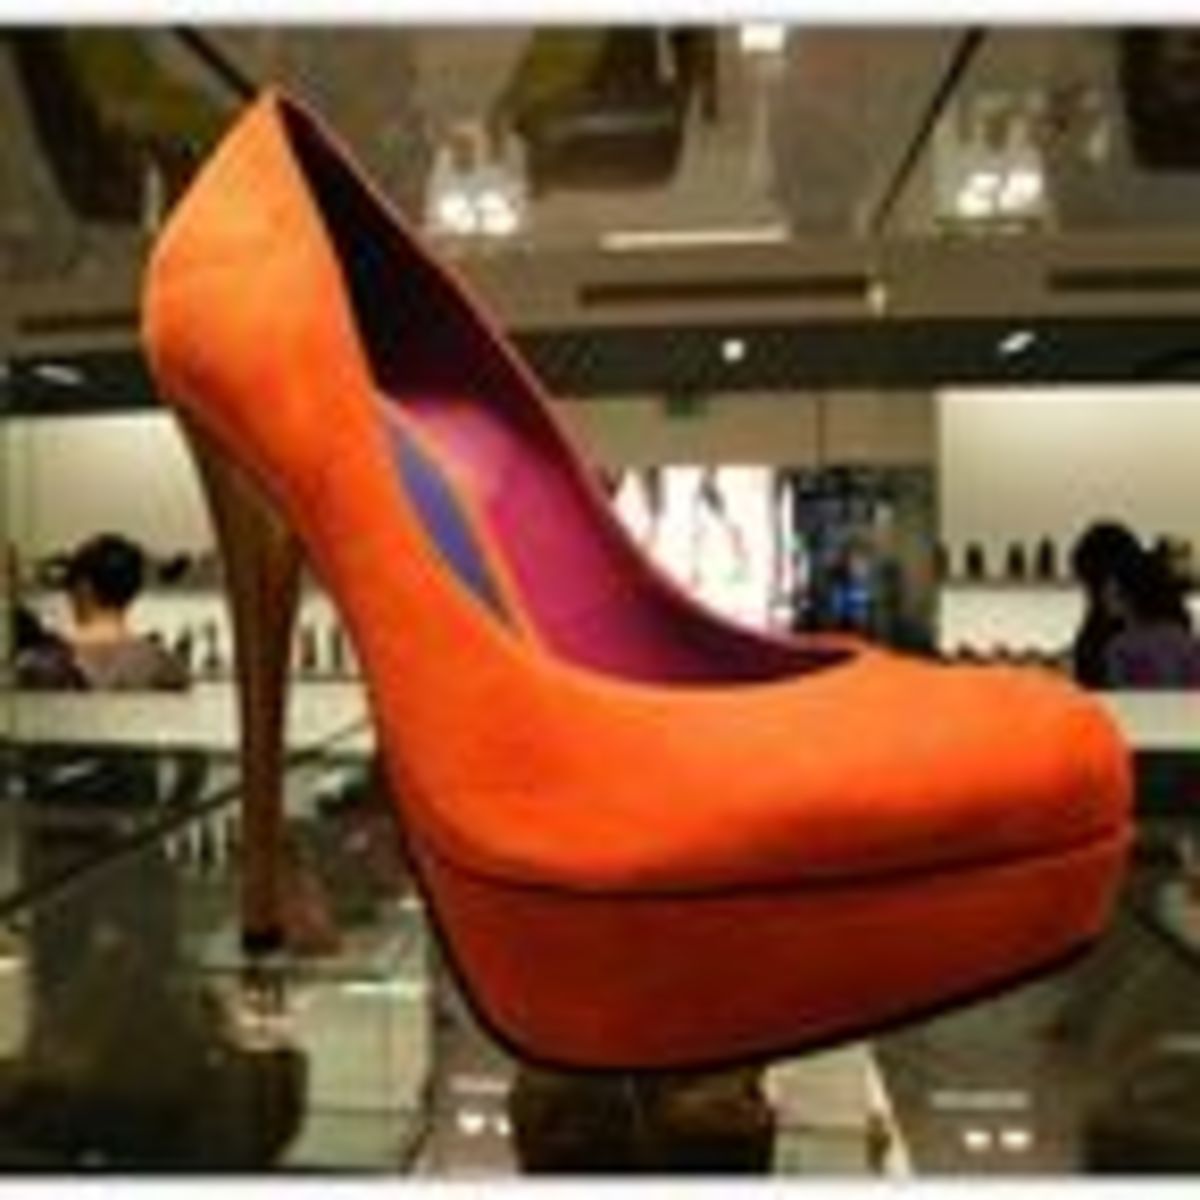 payless shoes sold as designer shoes